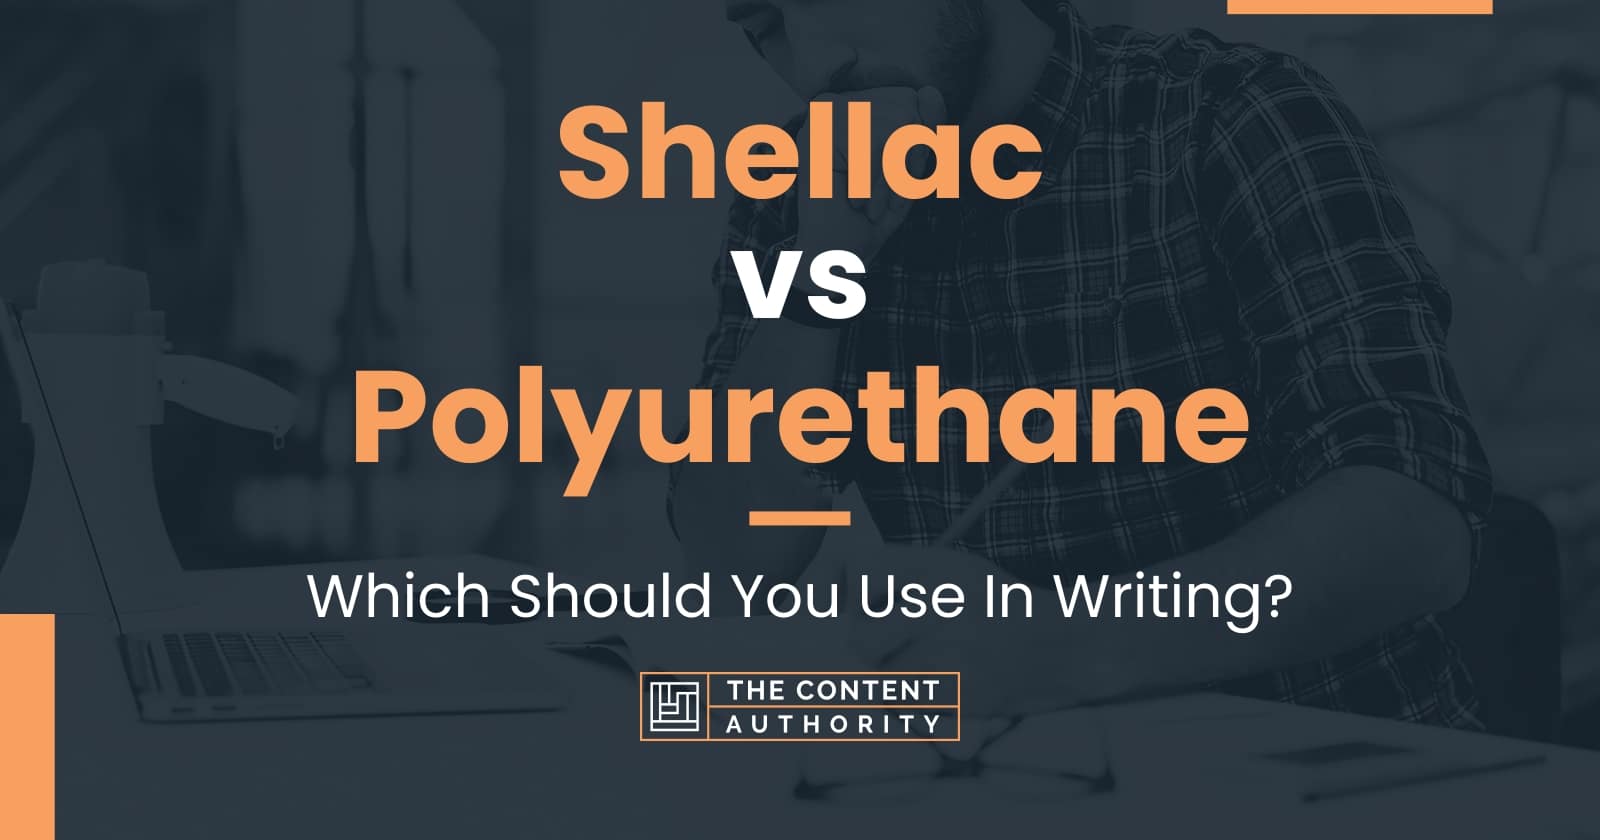 Which is Better - Polyurethane vs Shellac? An In-Depth Comparison - Rubcorp